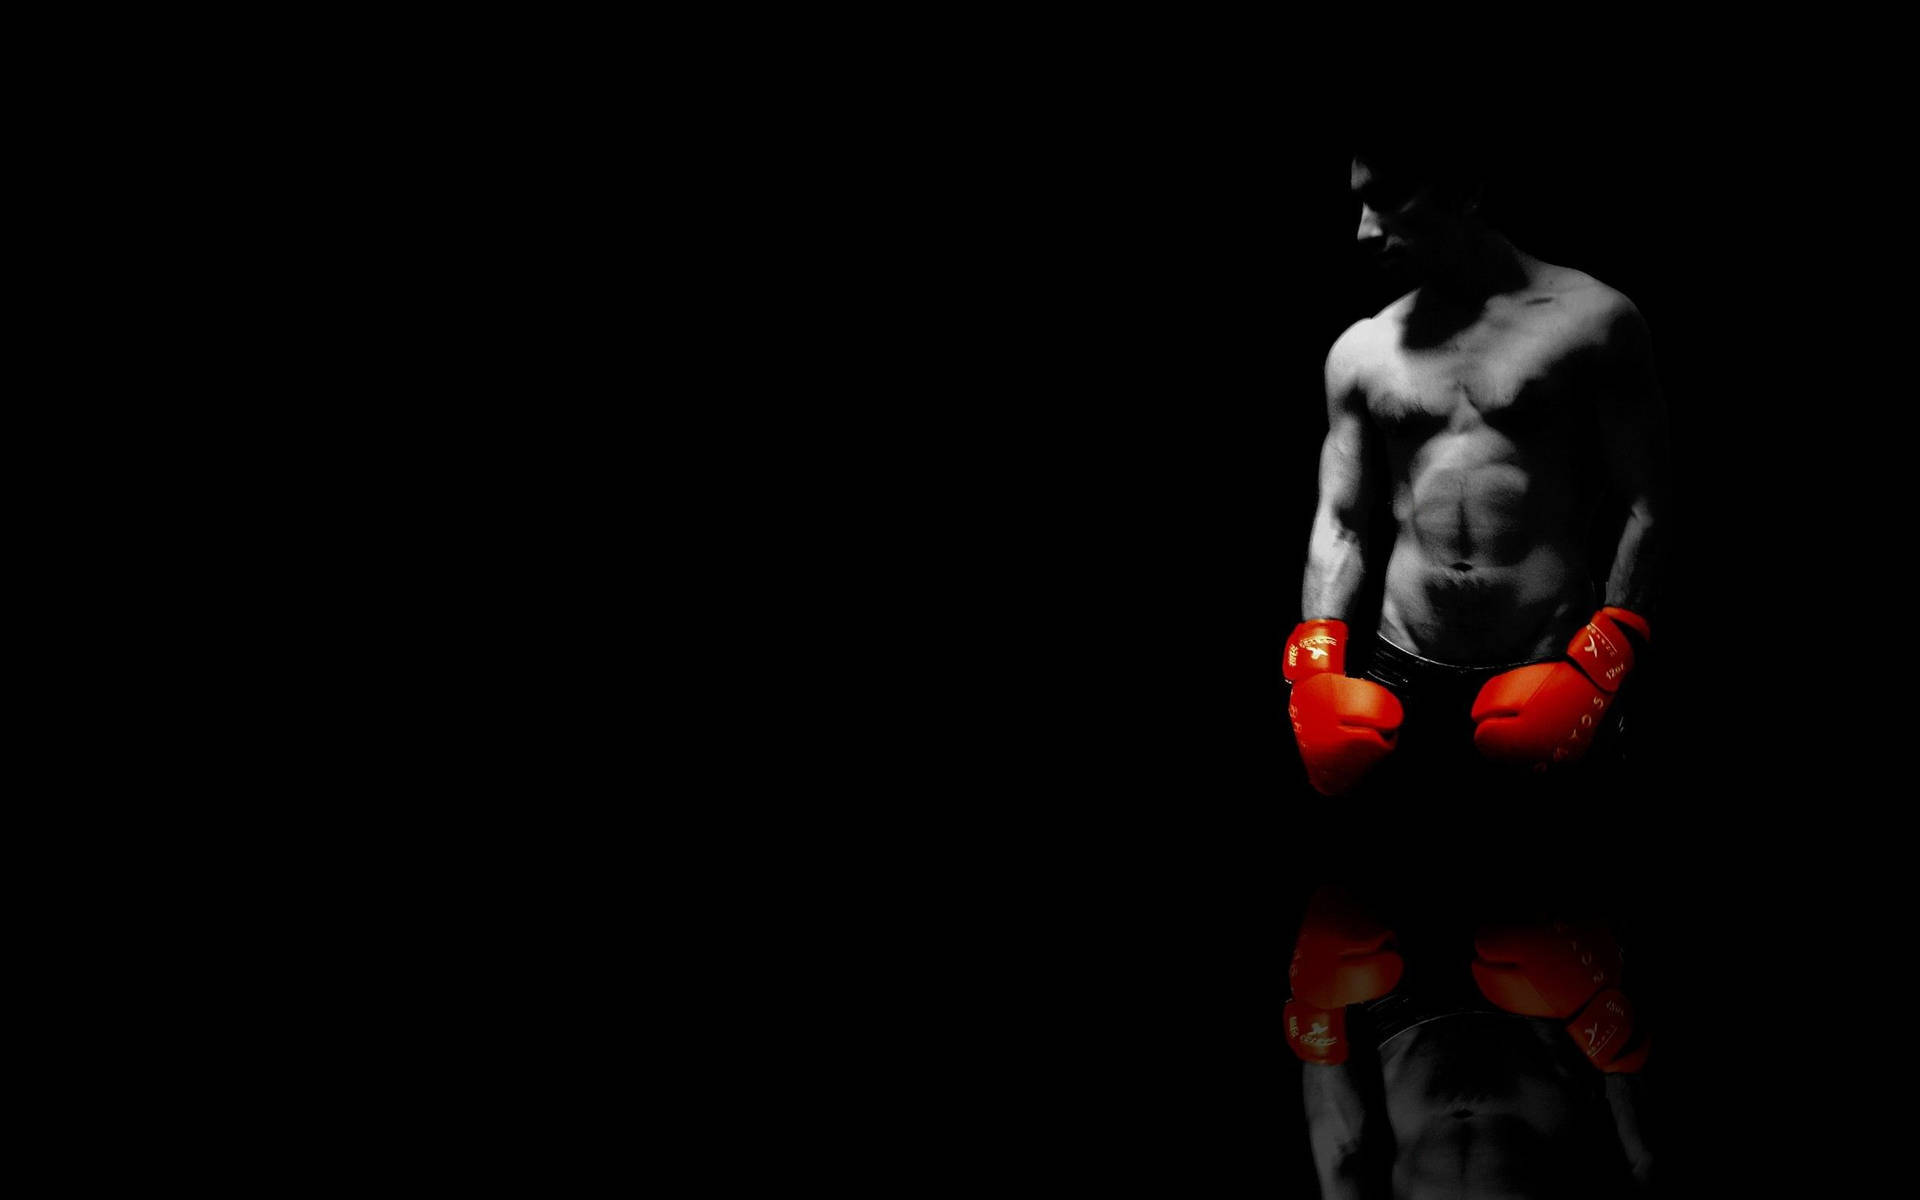 "Feel the power of boxing" Wallpaper